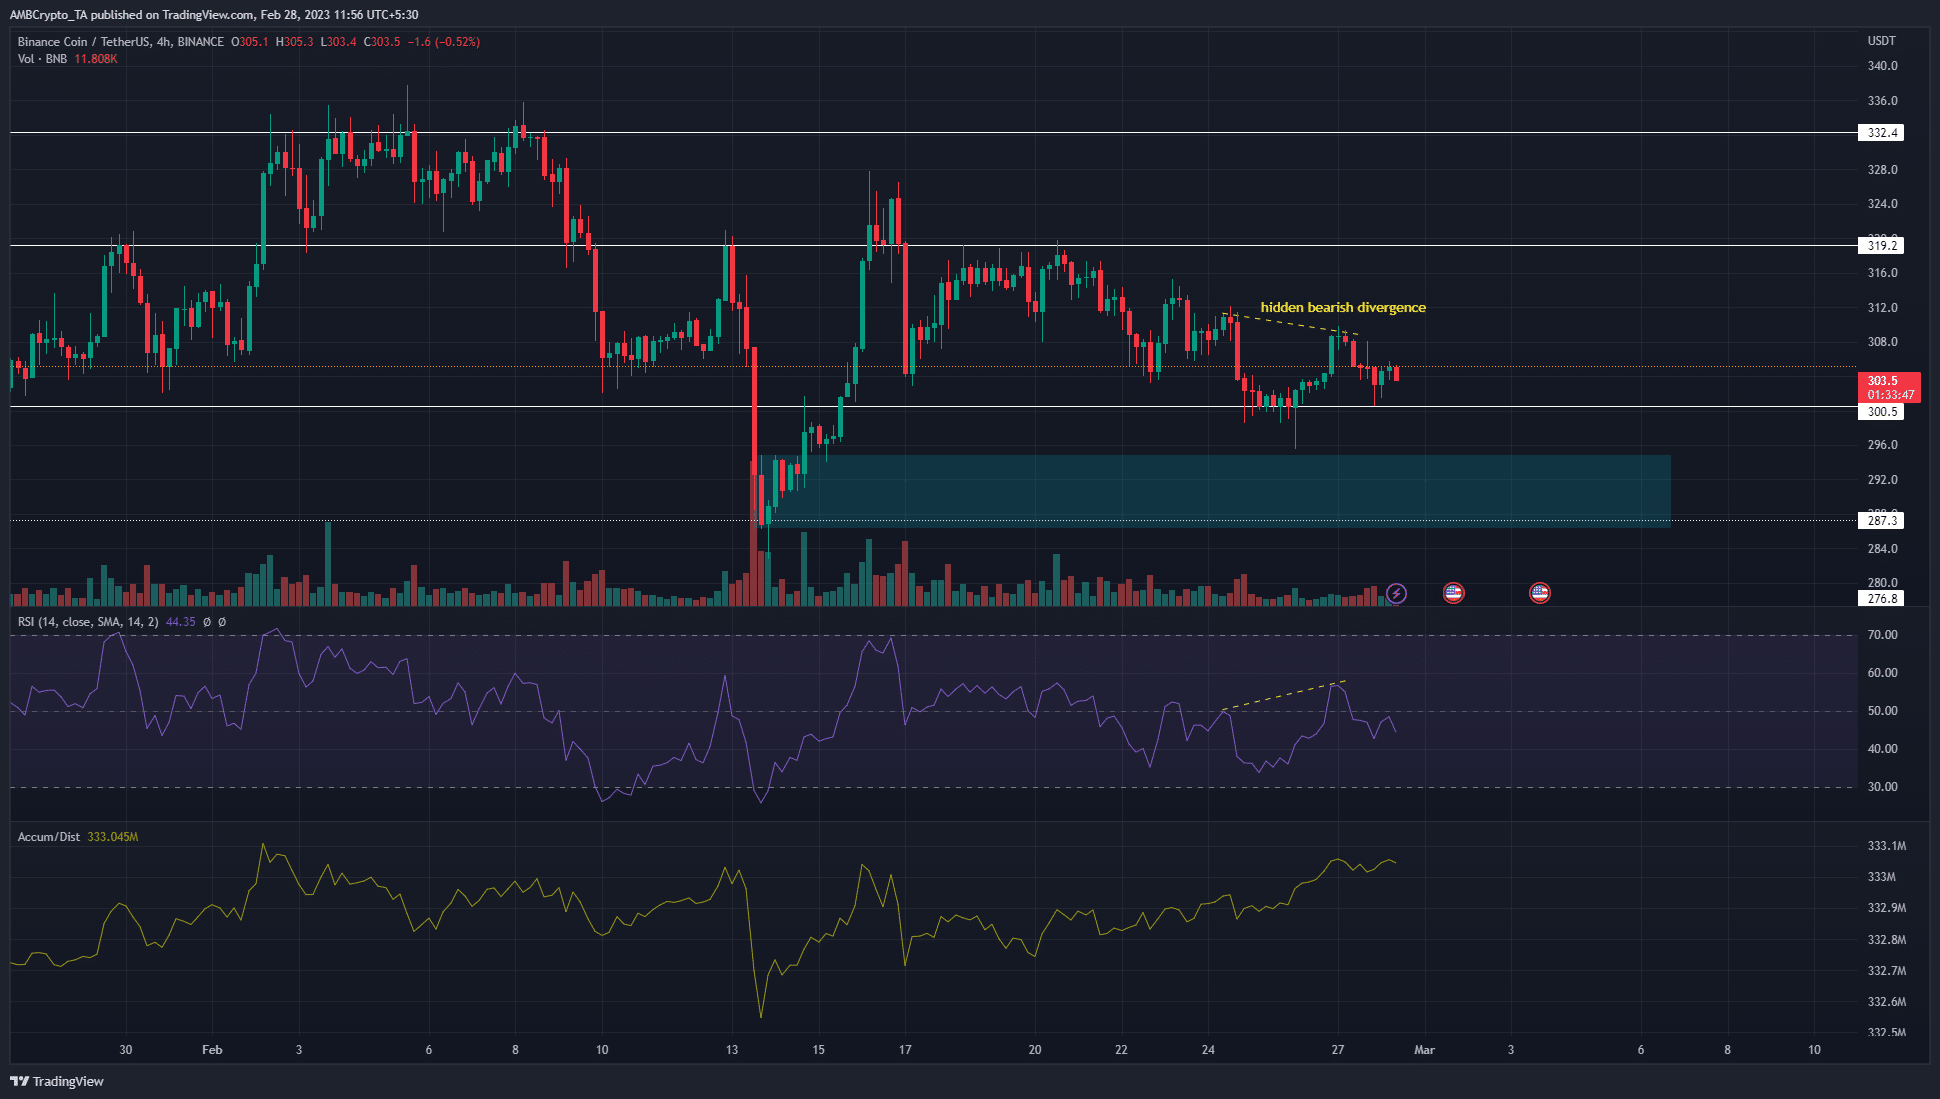 Do Binance Coin bulls need to wait for another drop in prices before buying?